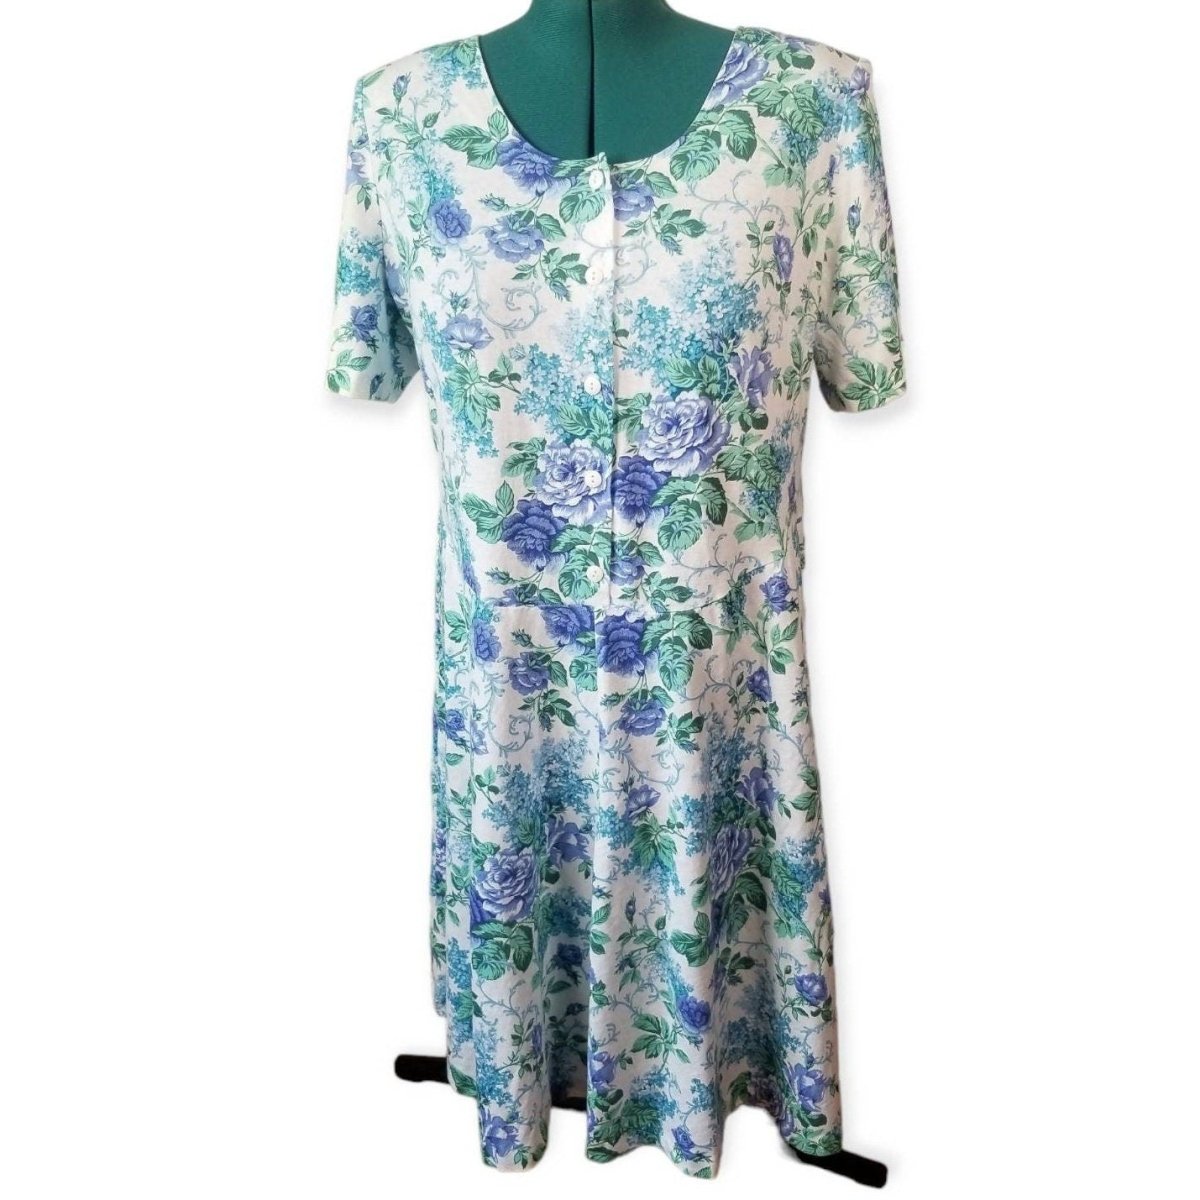 80s/90s Floral Midi Dress with Criss Cross Back 1X/2X - themallvintage The Mall Vintage